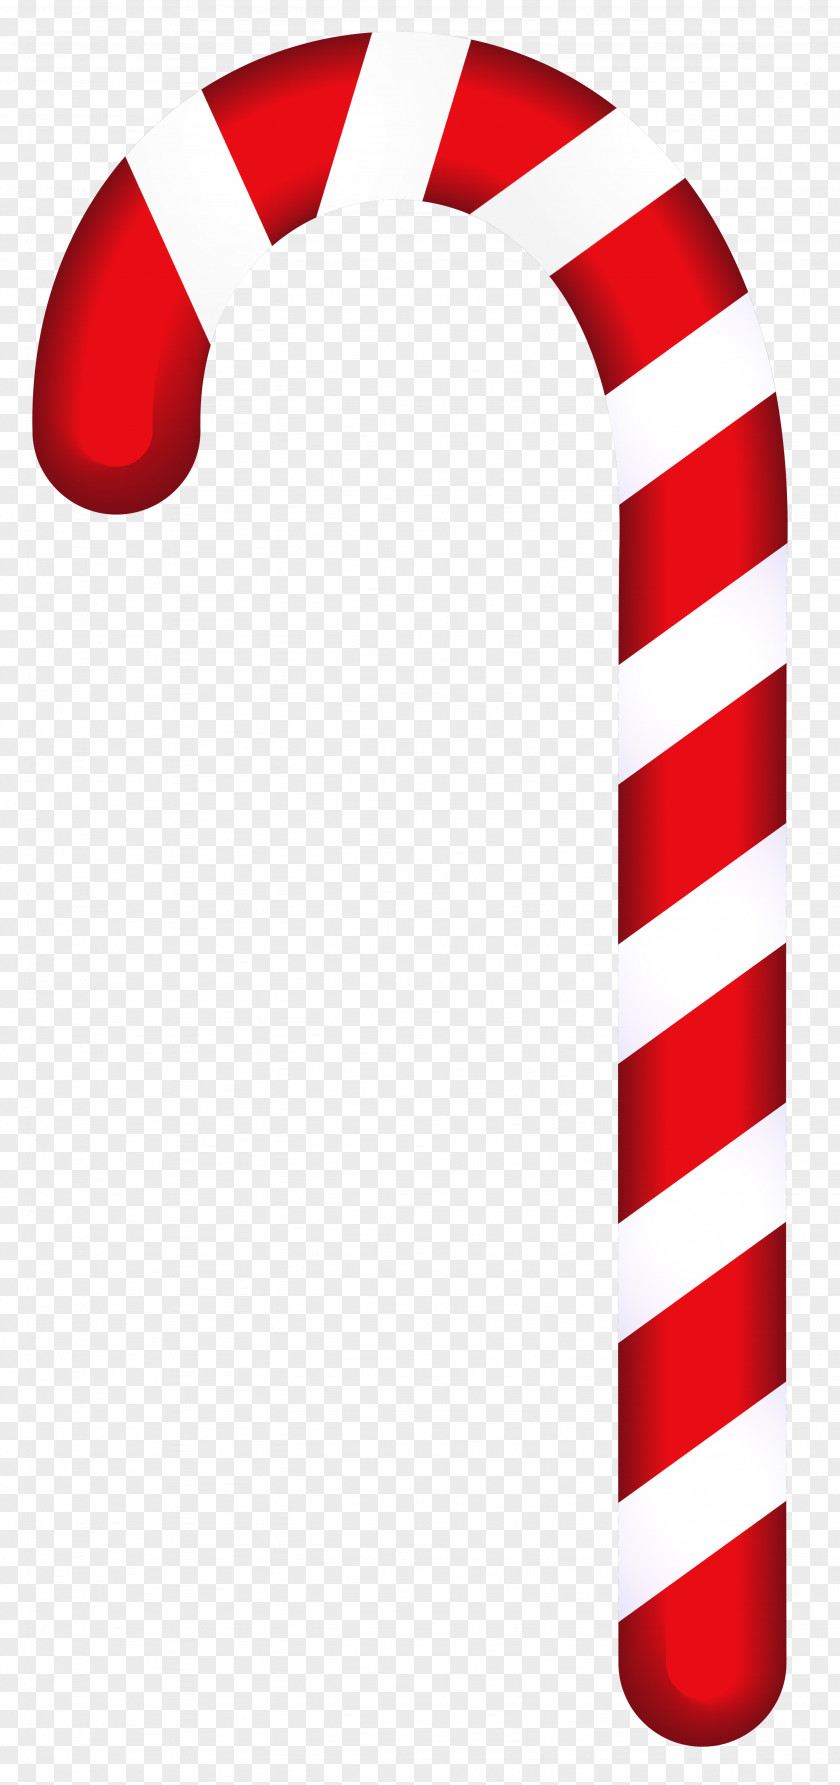 Pepermint Candy Cane Christmas Clip Art PNG